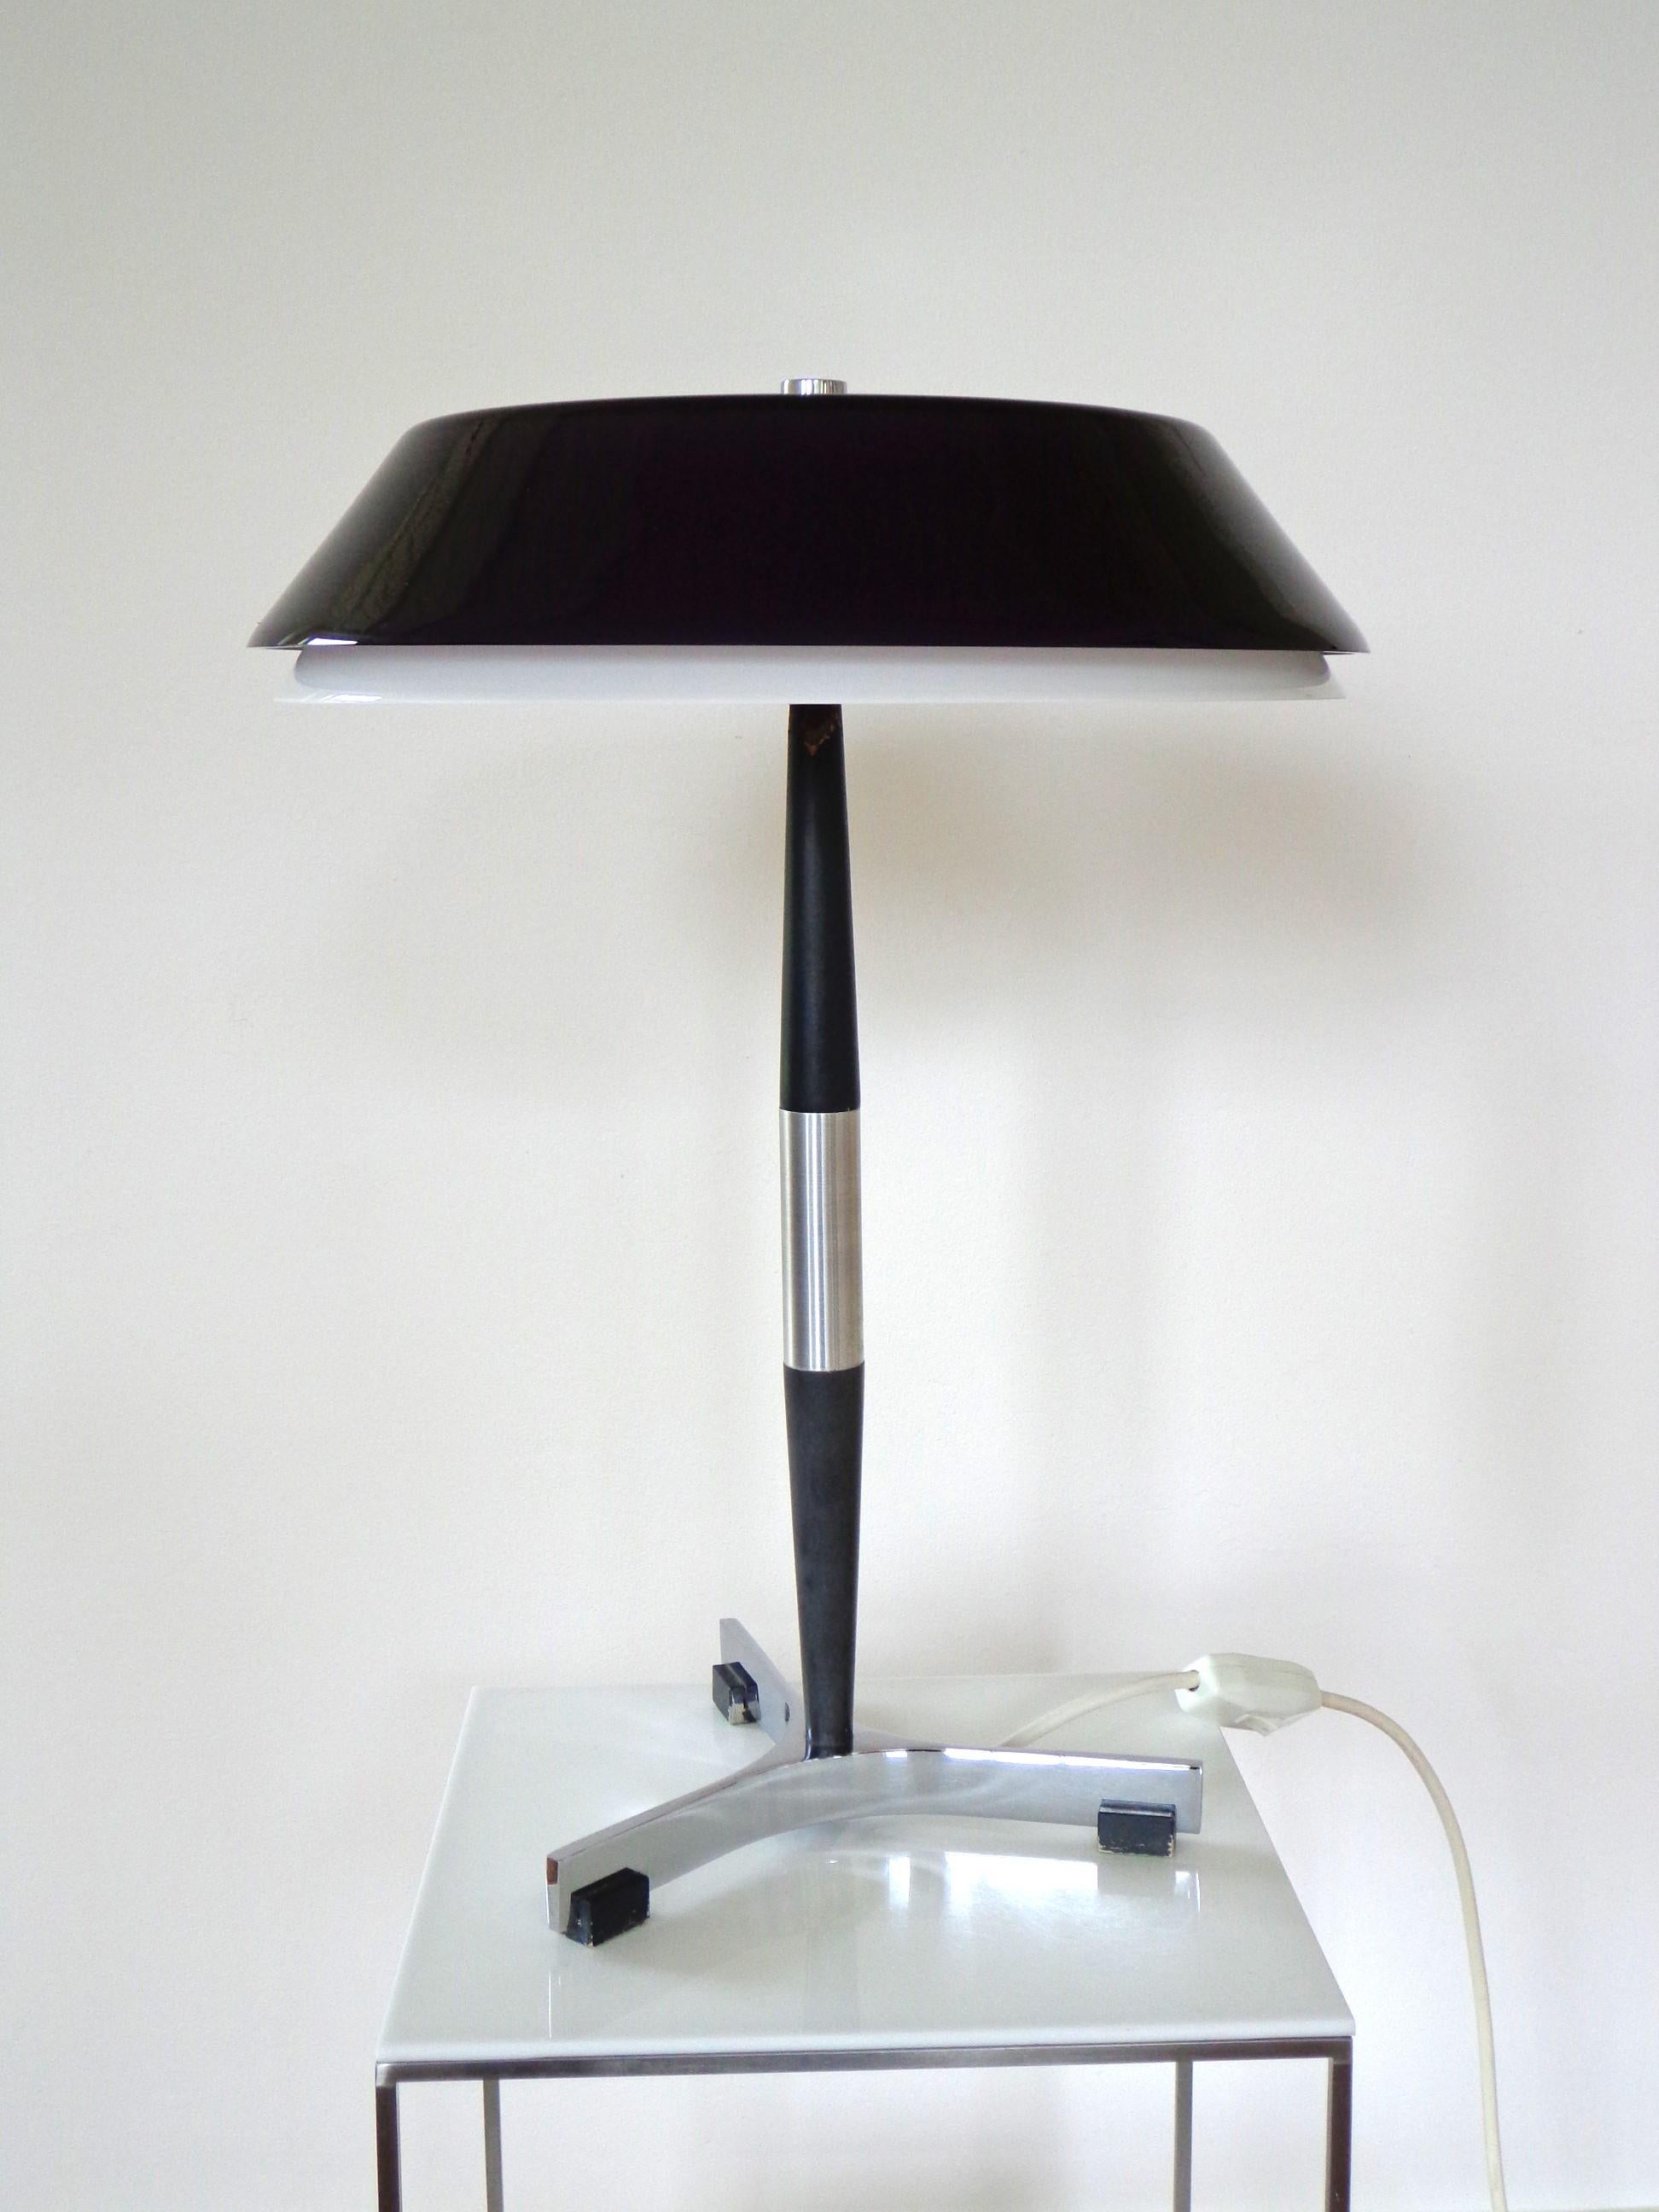 Rare table lamp model Senior designed by Jo Hammerborg. Produced by Fog & Mørup in Denmark.
Satin aluminium, black lacquerd and chrome base, glass lilla lampshade exterior, opal white interior. This table lamp features two light